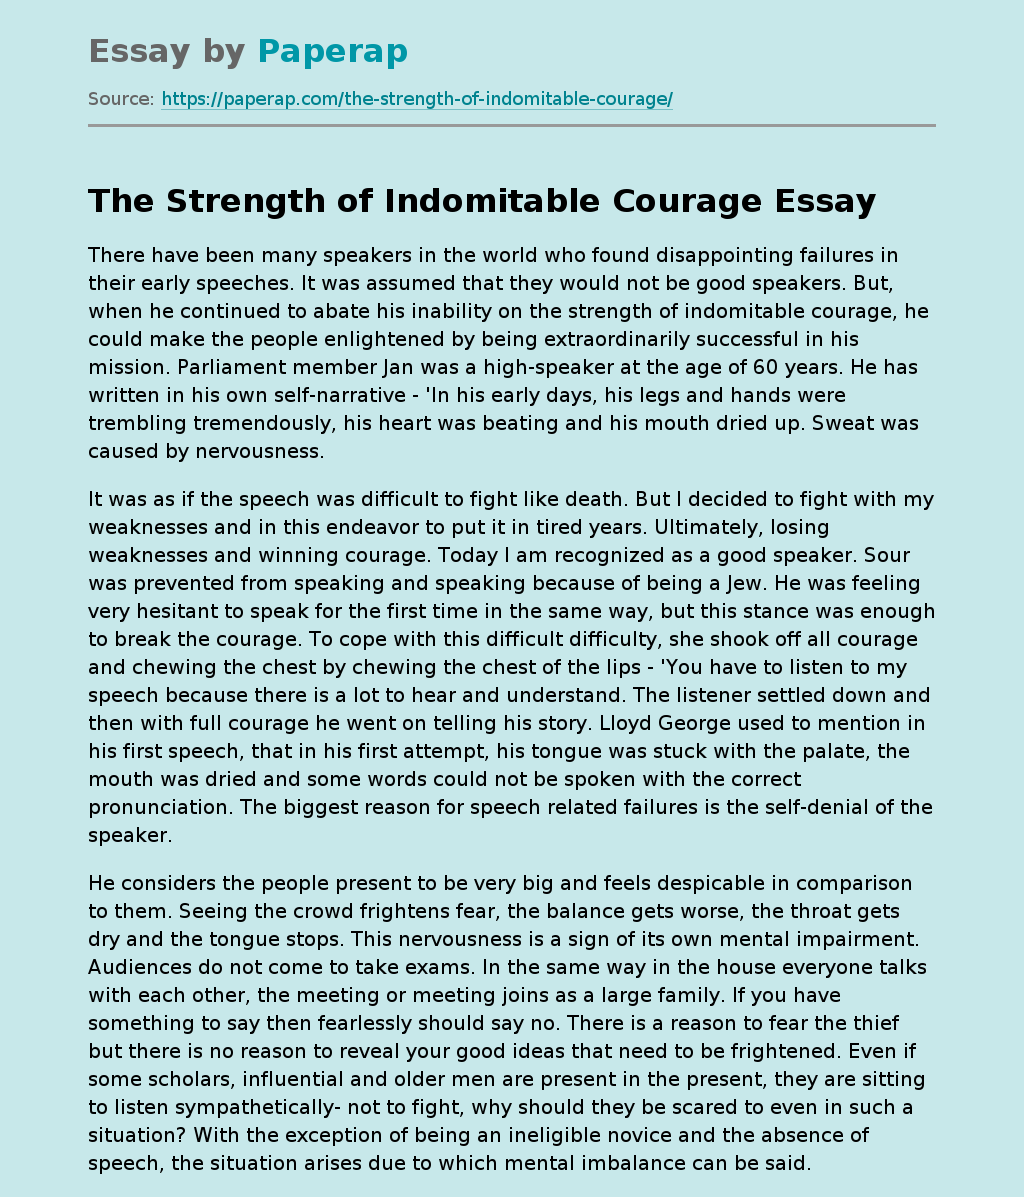 The Strength of Indomitable Courage